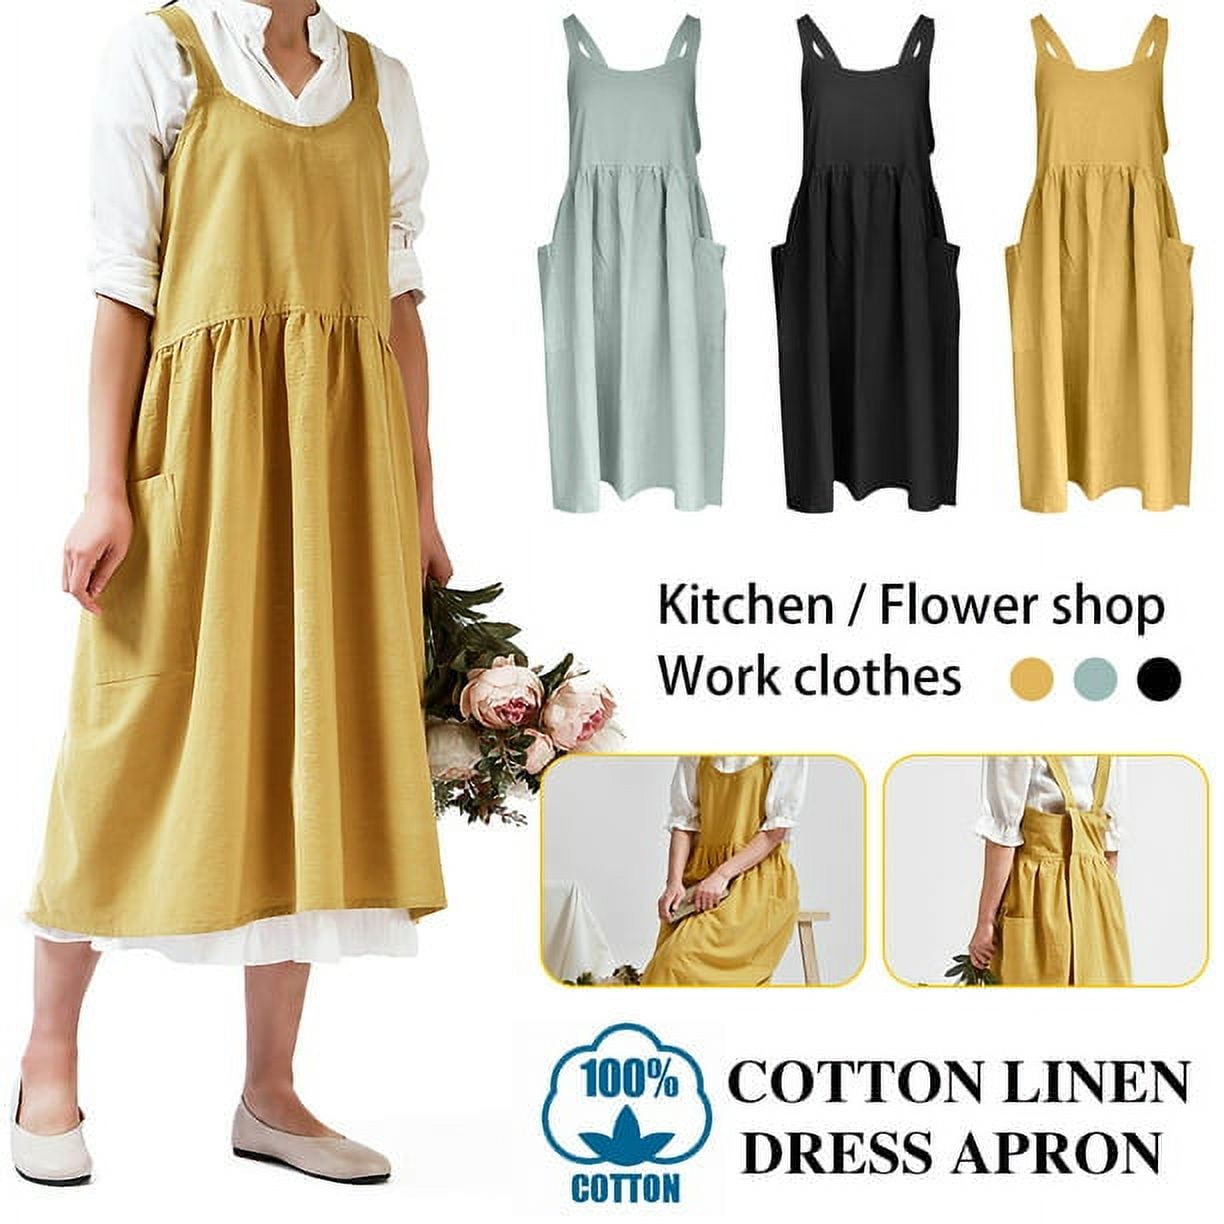 She Makes The Cutest Apron With A Criss Cross Back, But Not To Wear In The  Kitchen!